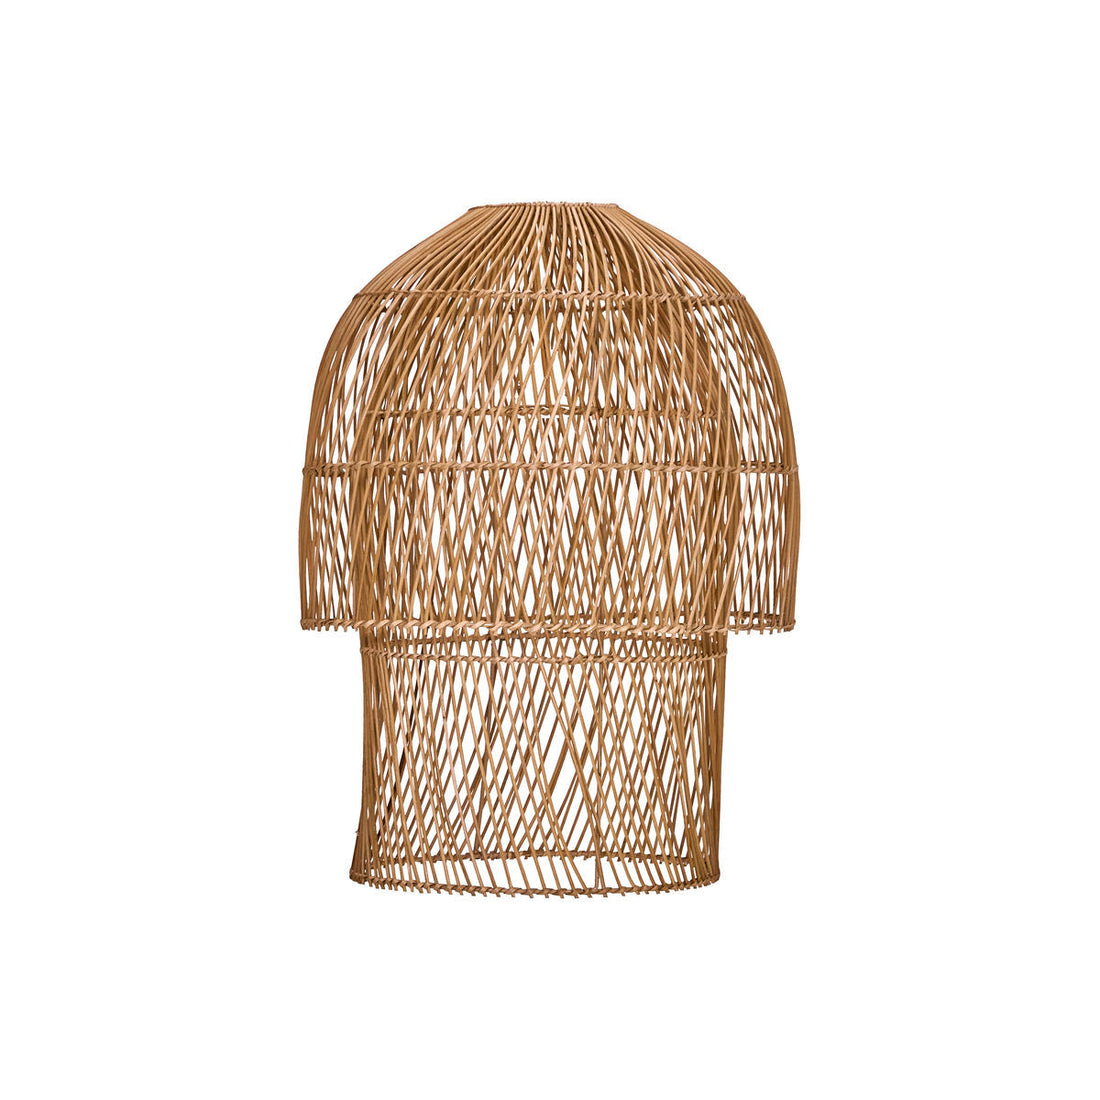 House Doctor Lampshade, Hdgetti, Natural